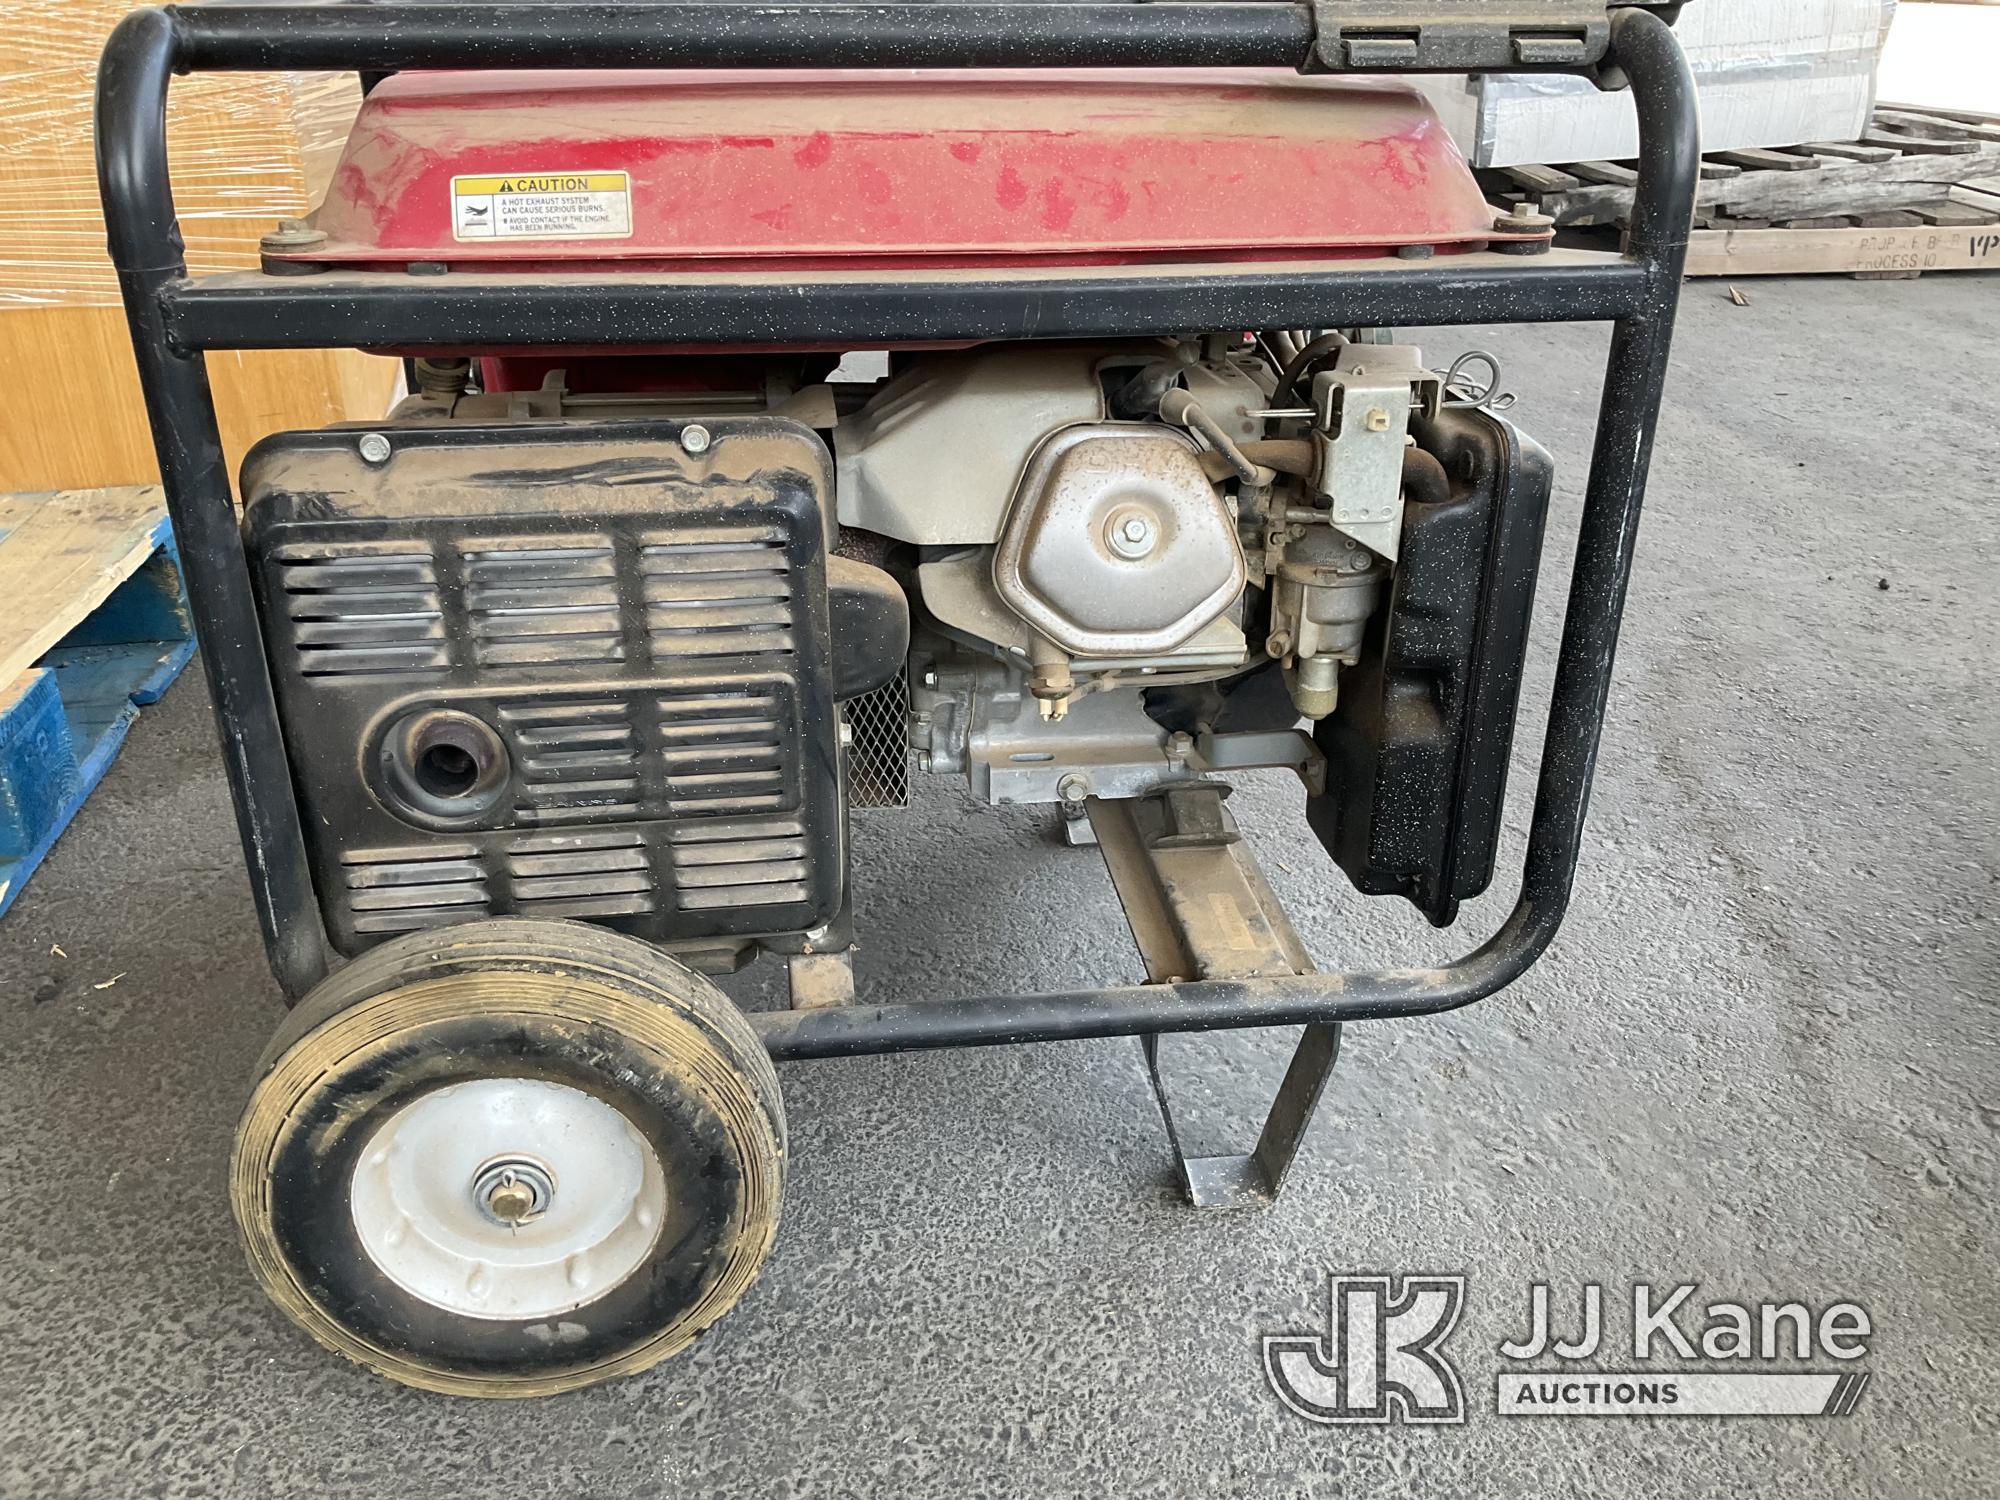 (Jurupa Valley, CA) Honda EM5000s Generator (Used) NOTE: This unit is being sold AS IS/WHERE IS via